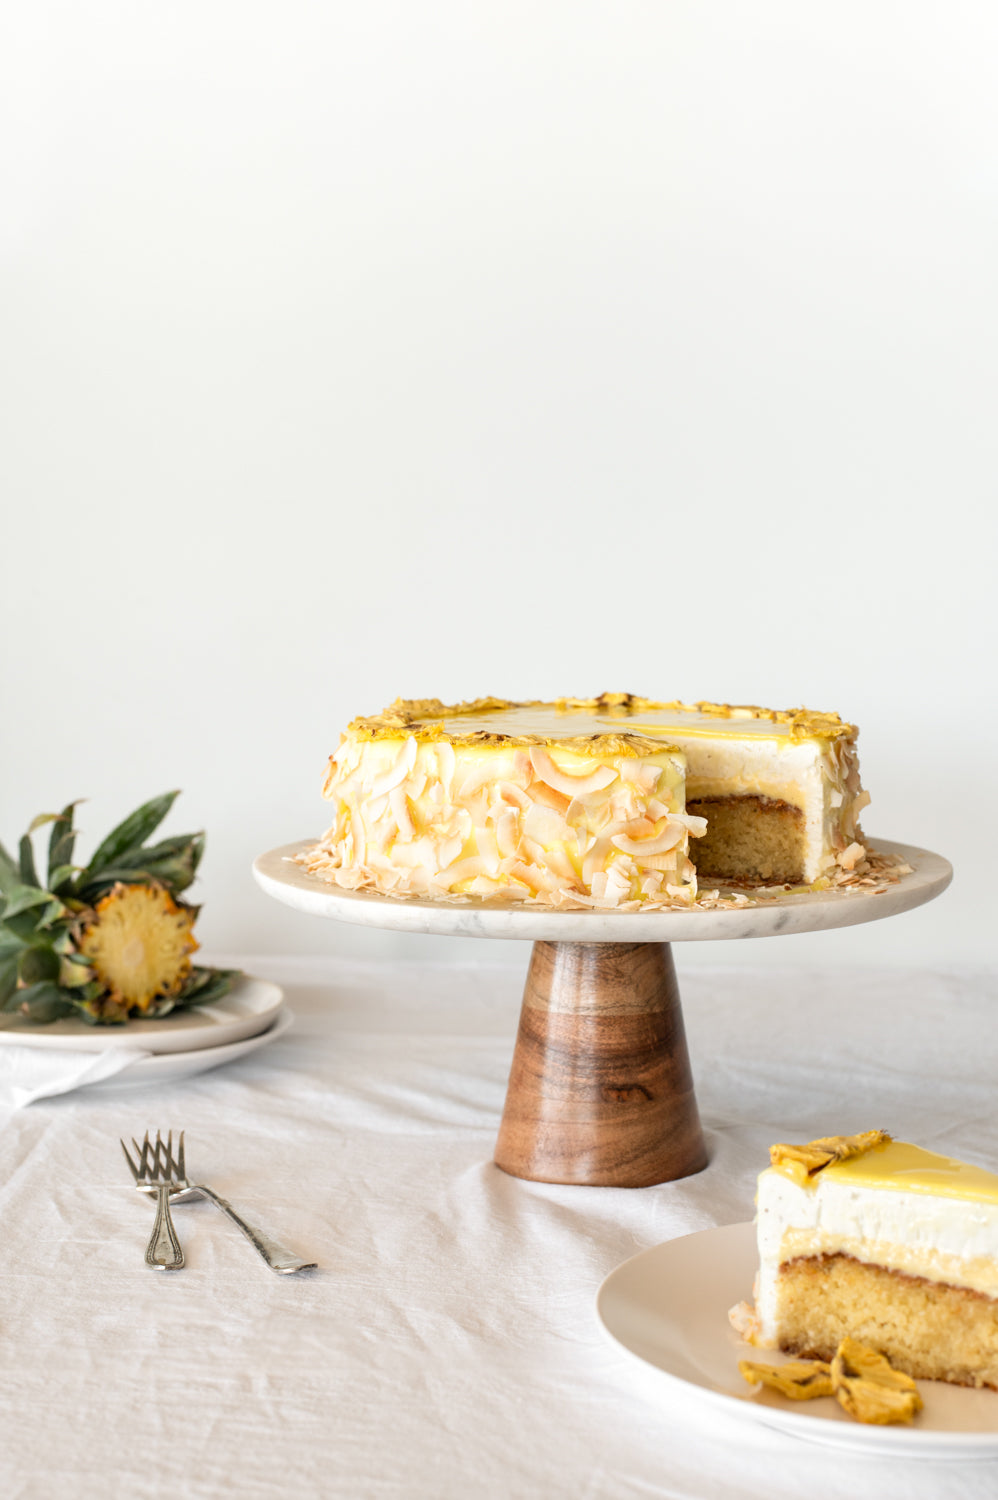 A yellow tropical cake garnished with pineapple and coconut